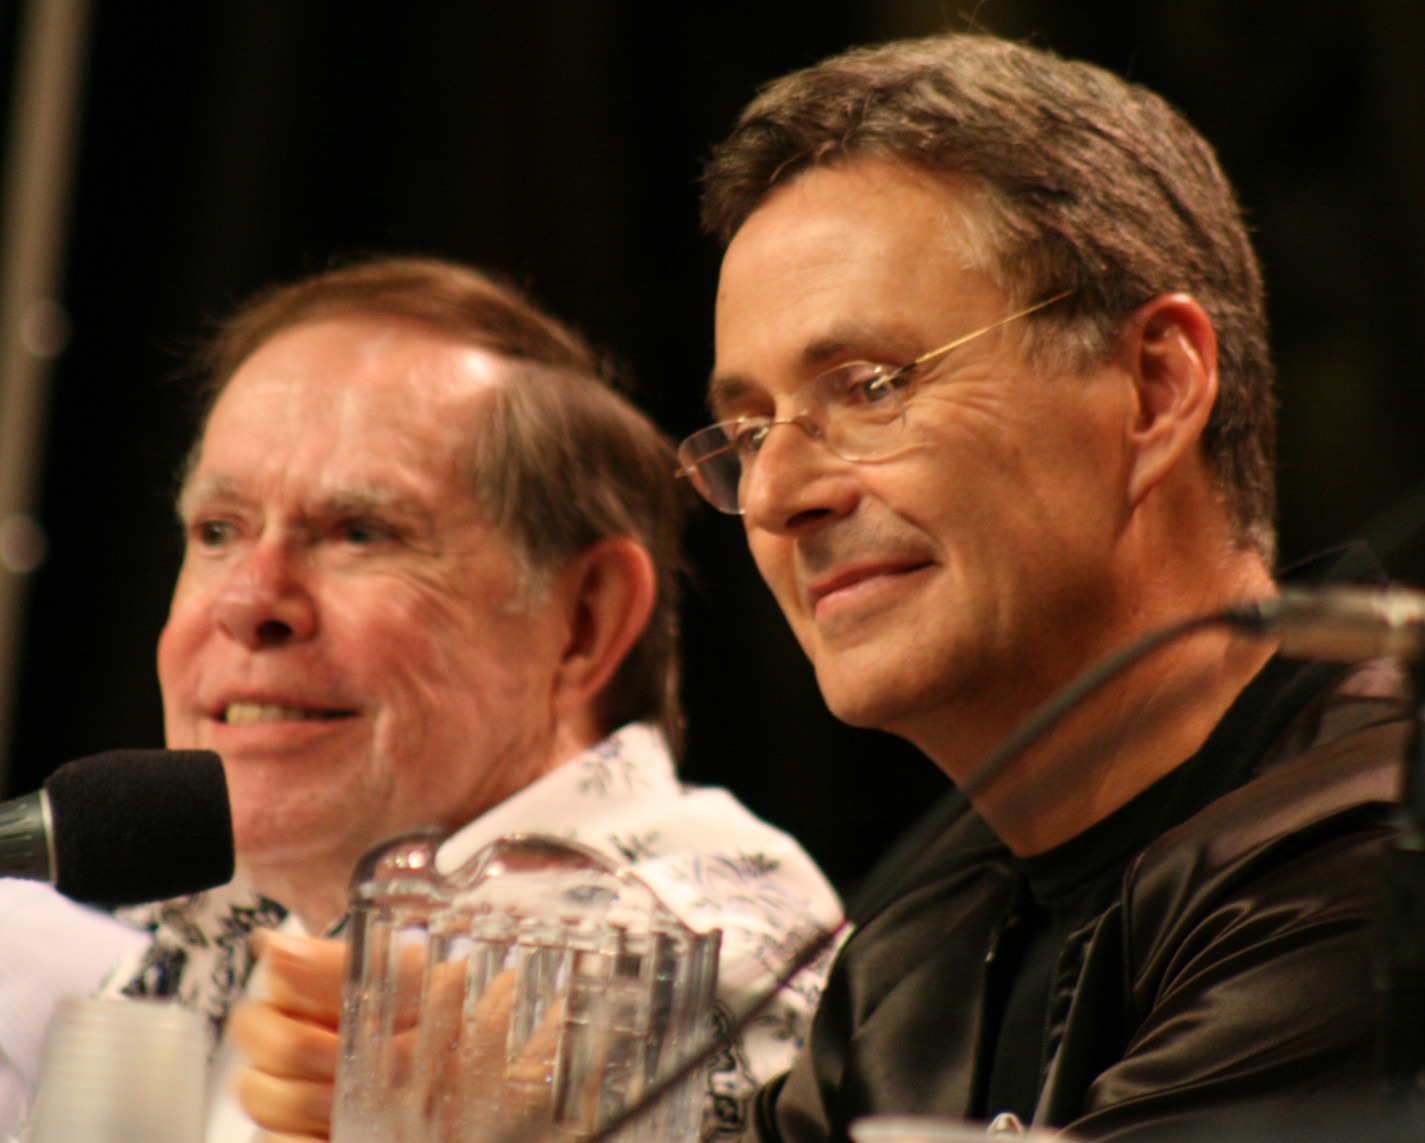 Visionary Syd Mead and effects guru Mark Stetson discuss Blade Runner at Comic-Con 2007.